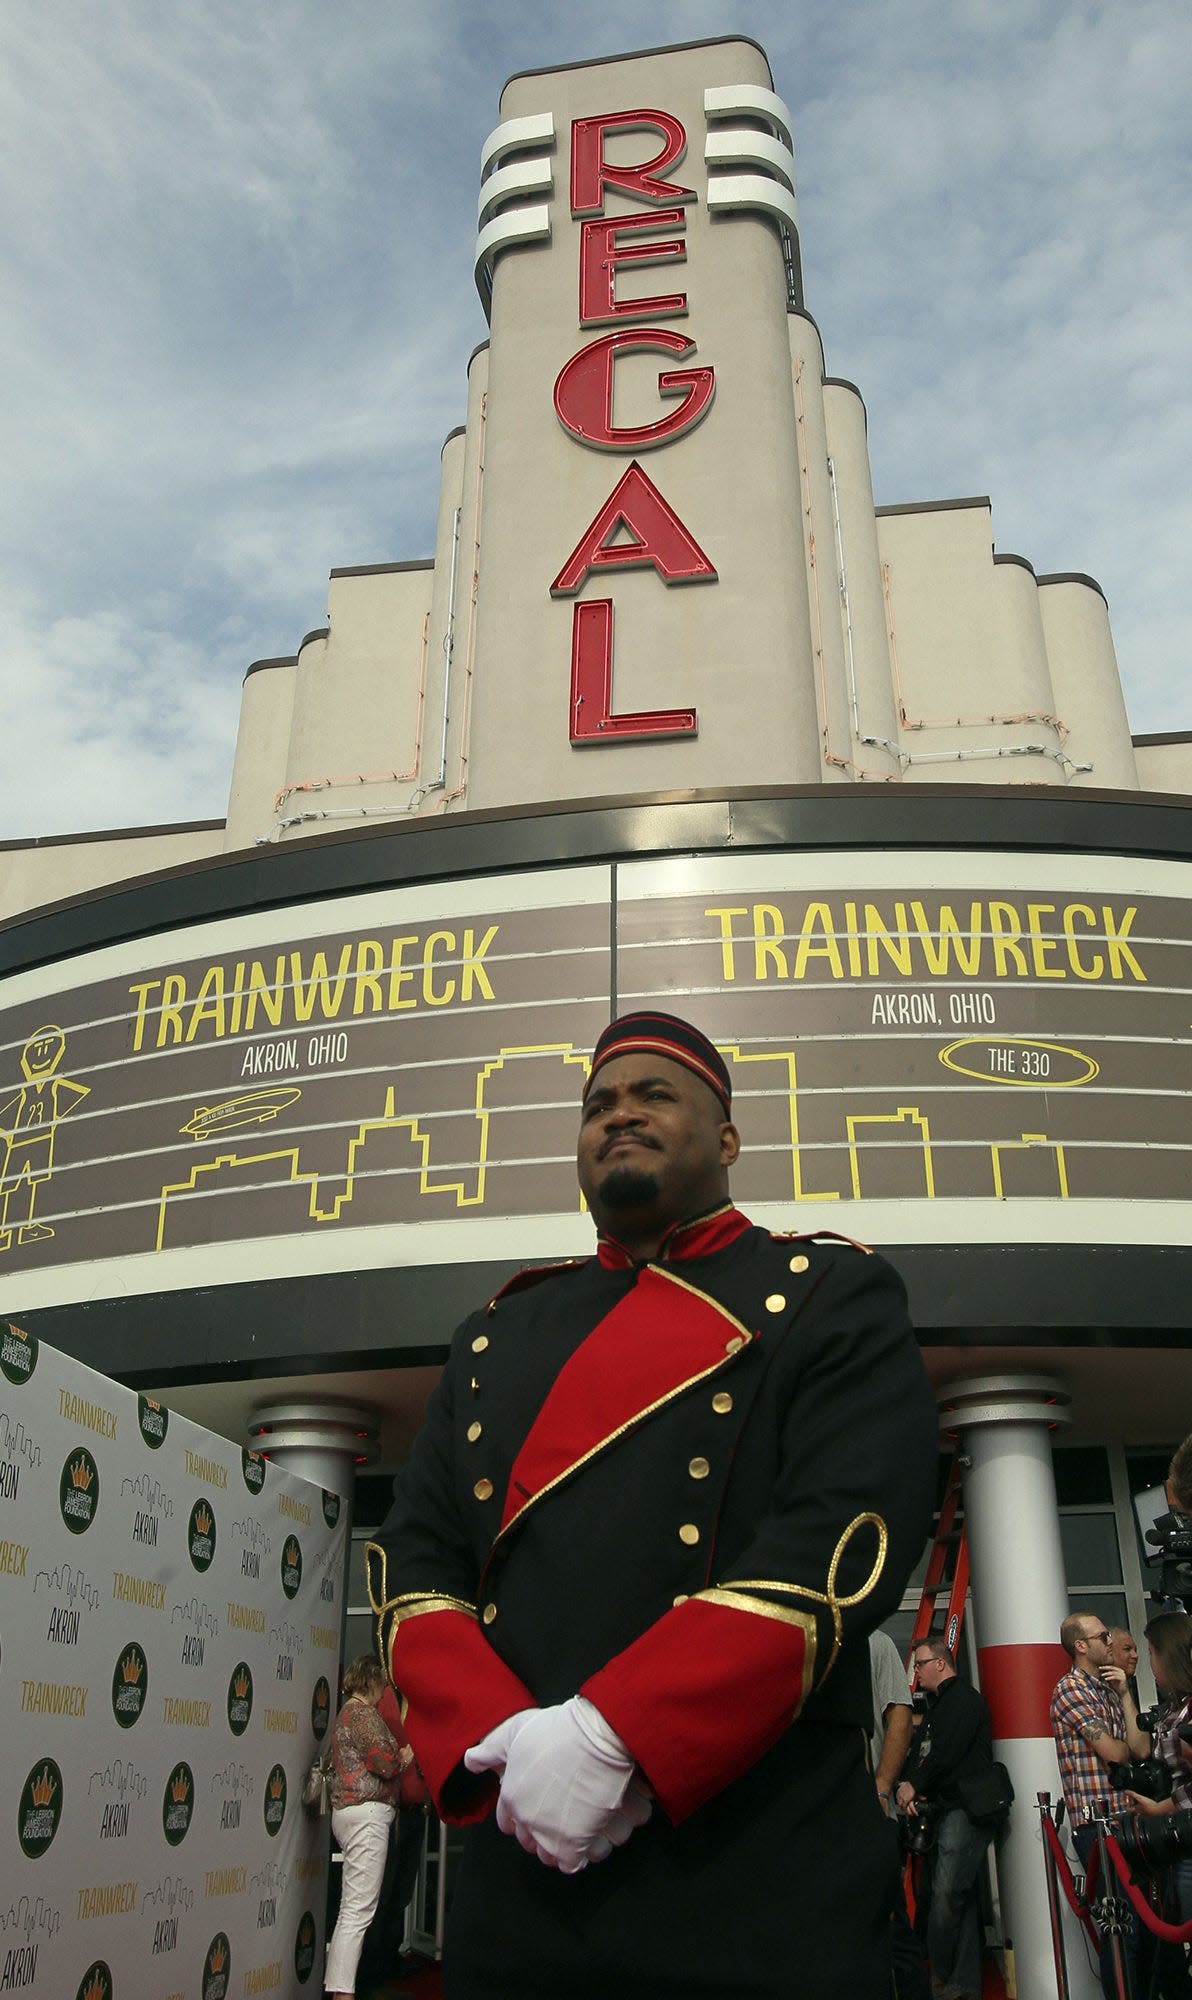 DeAngelo Graham waits  to greet special guests outside the Regal Cinema where the movie "Trainwreck" premiers Friday, July 10, 2015, in Copley Township, Ohio. The movie features Cleveland Cavaliers' star LeBron James in his first major screen role. (Michael Chritton/Akron Beacon Journal)